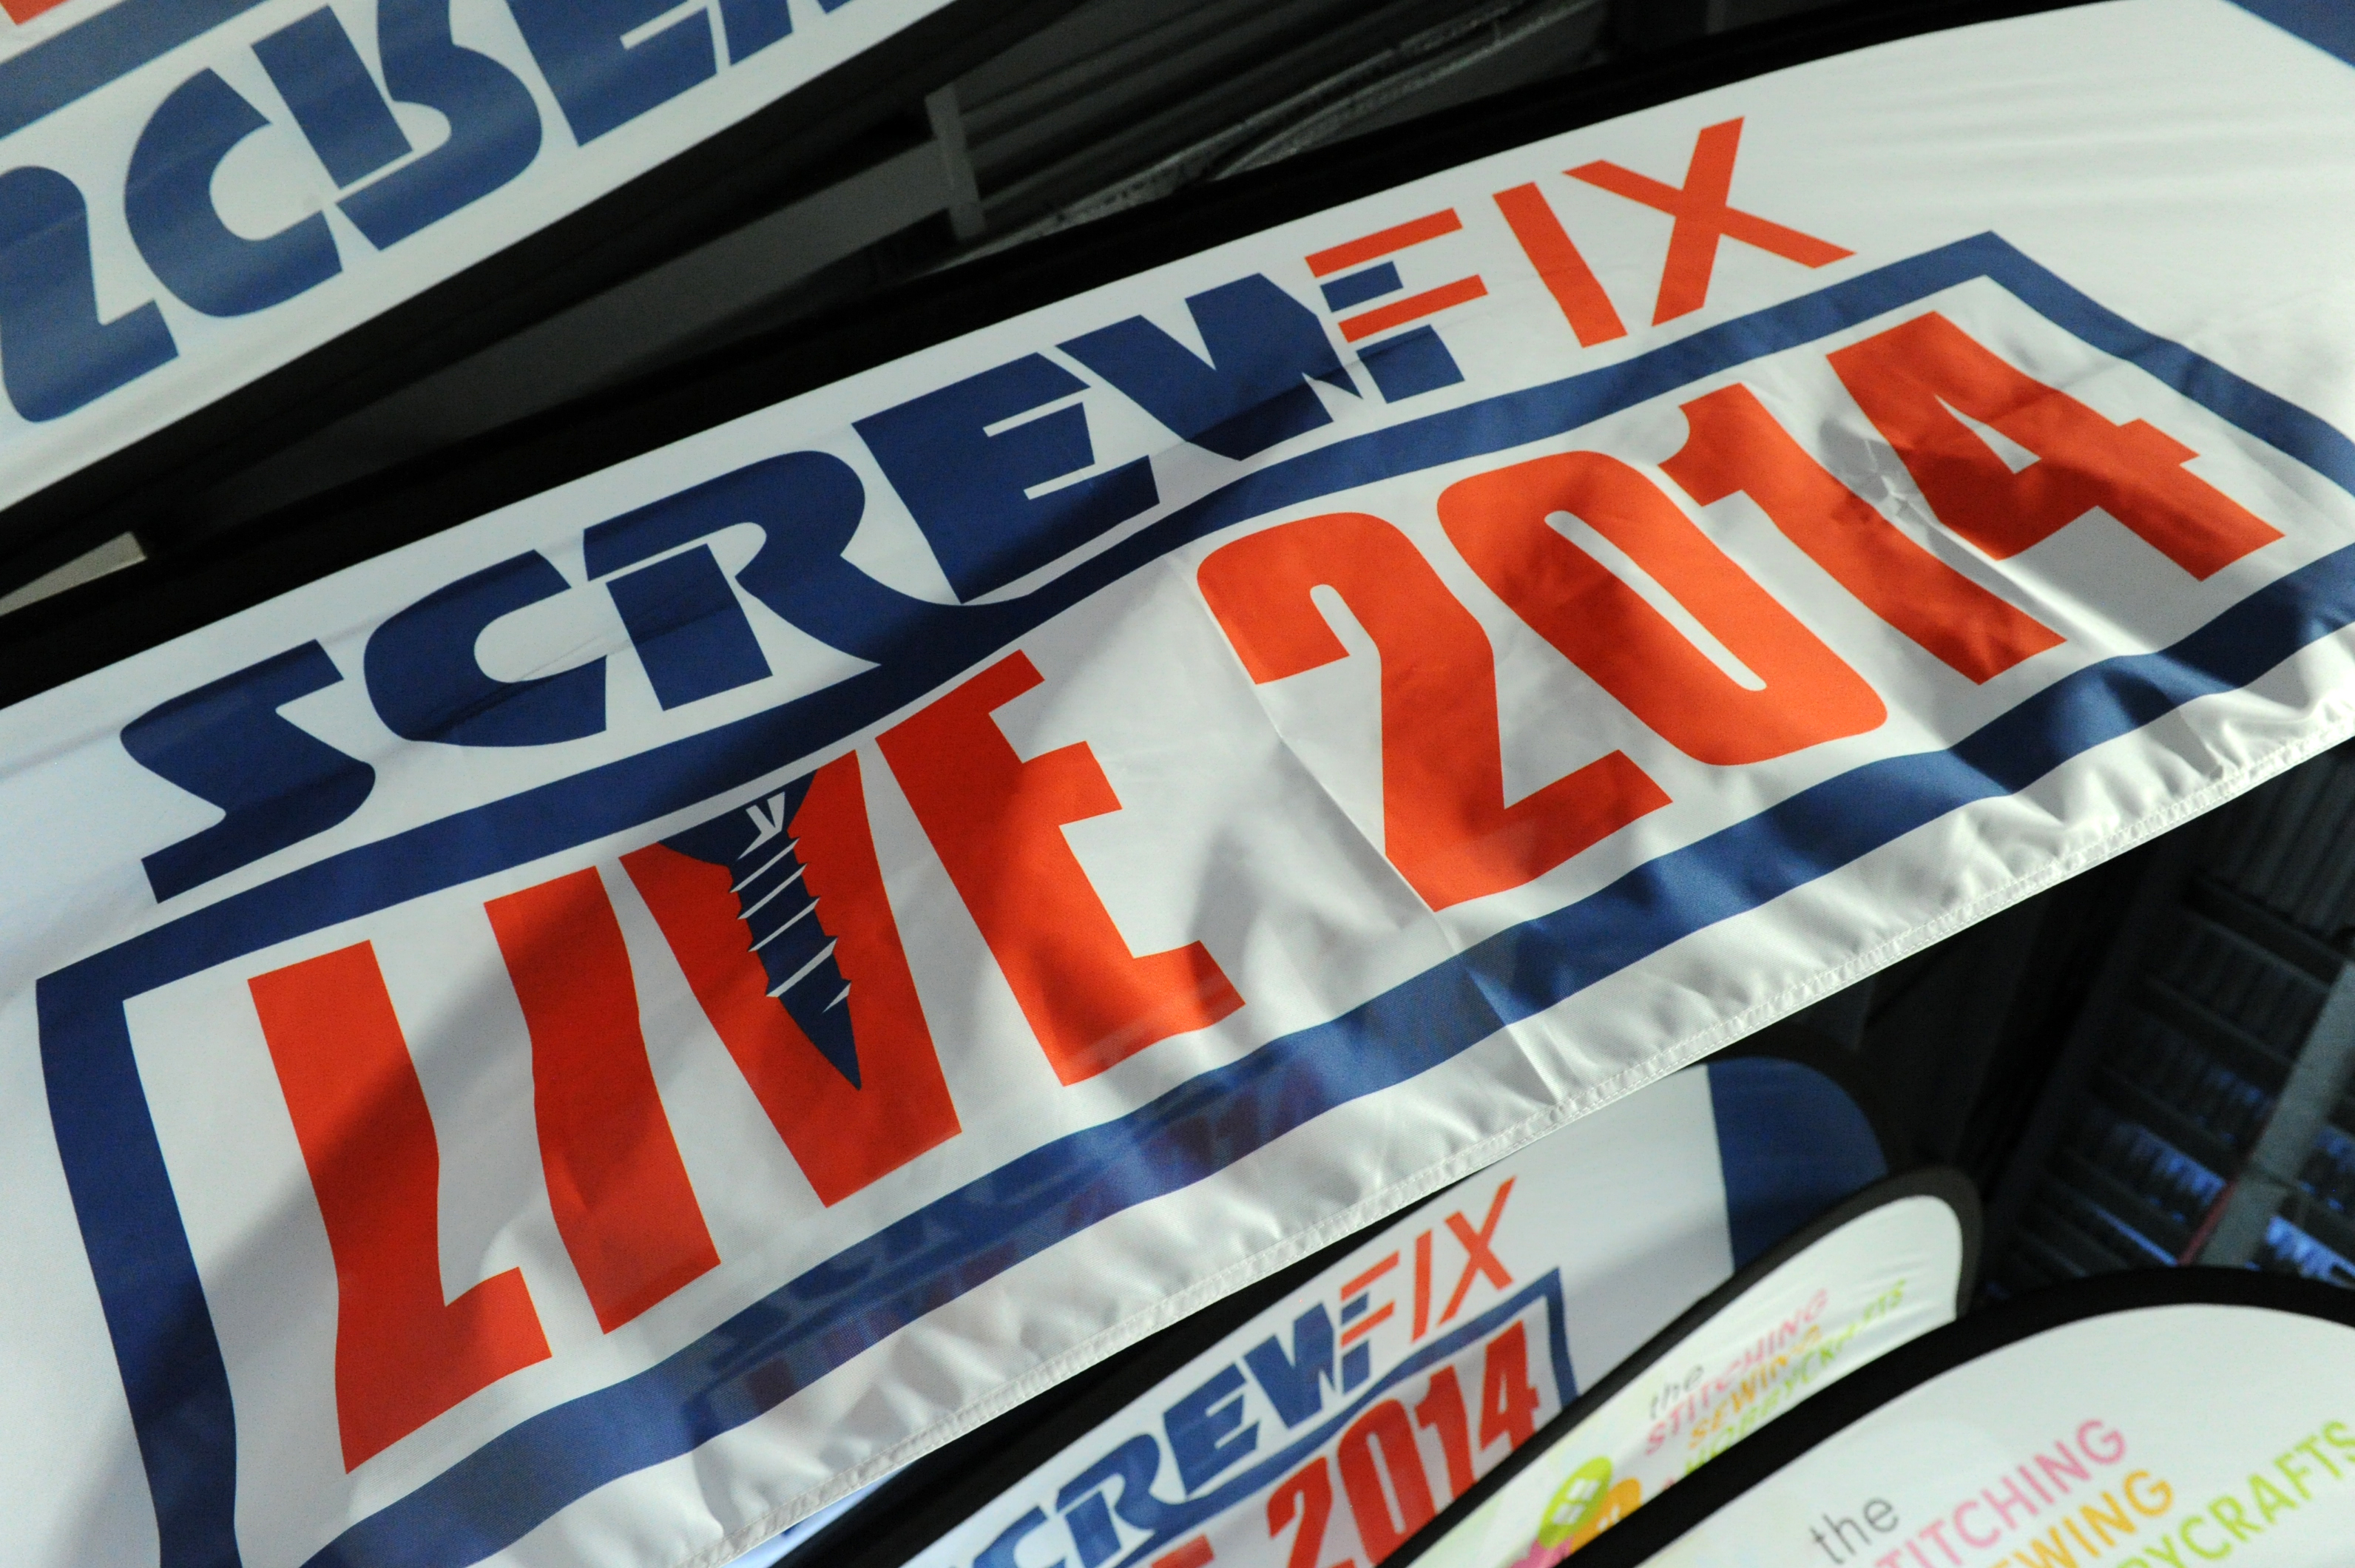 Screwfix LIVE is back, bigger and better than ever!